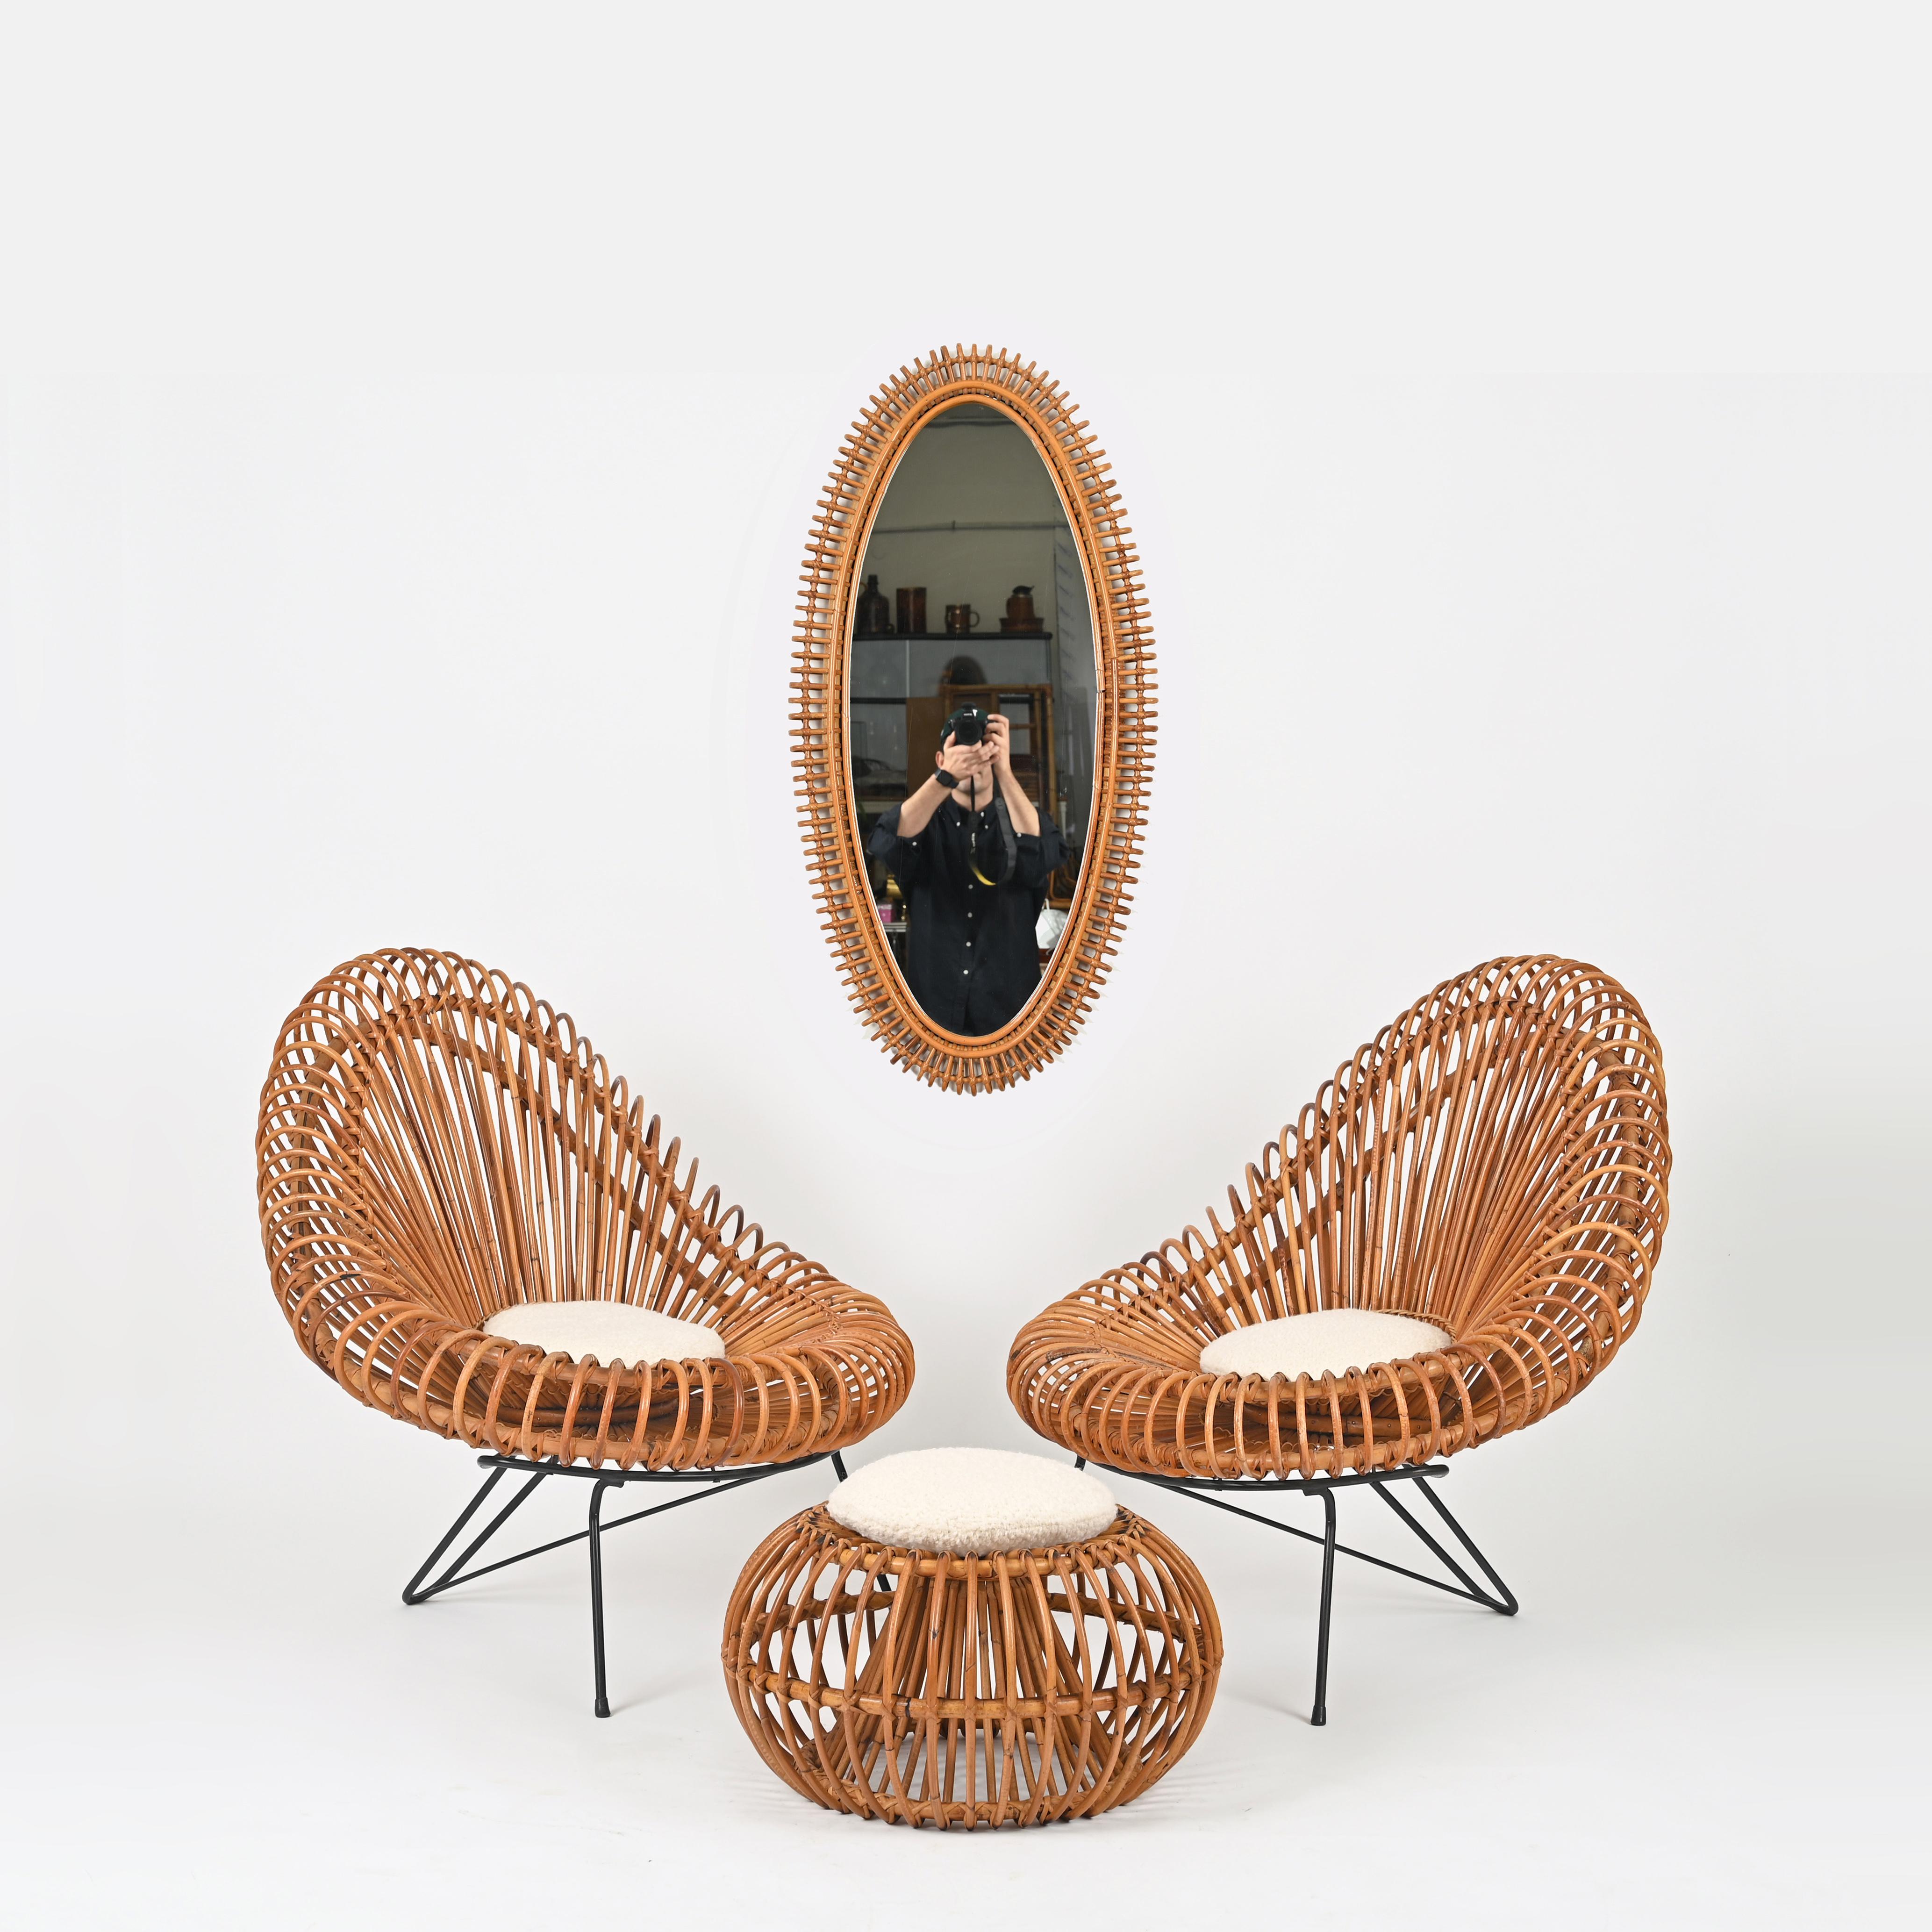 Spectacular Mid-Century French Riviera complete living room set designed by Janine Abraham & Dirk Jan Rol and made in France during the late 1950s.

This incredibly rare sculptural rattan set is considered the 